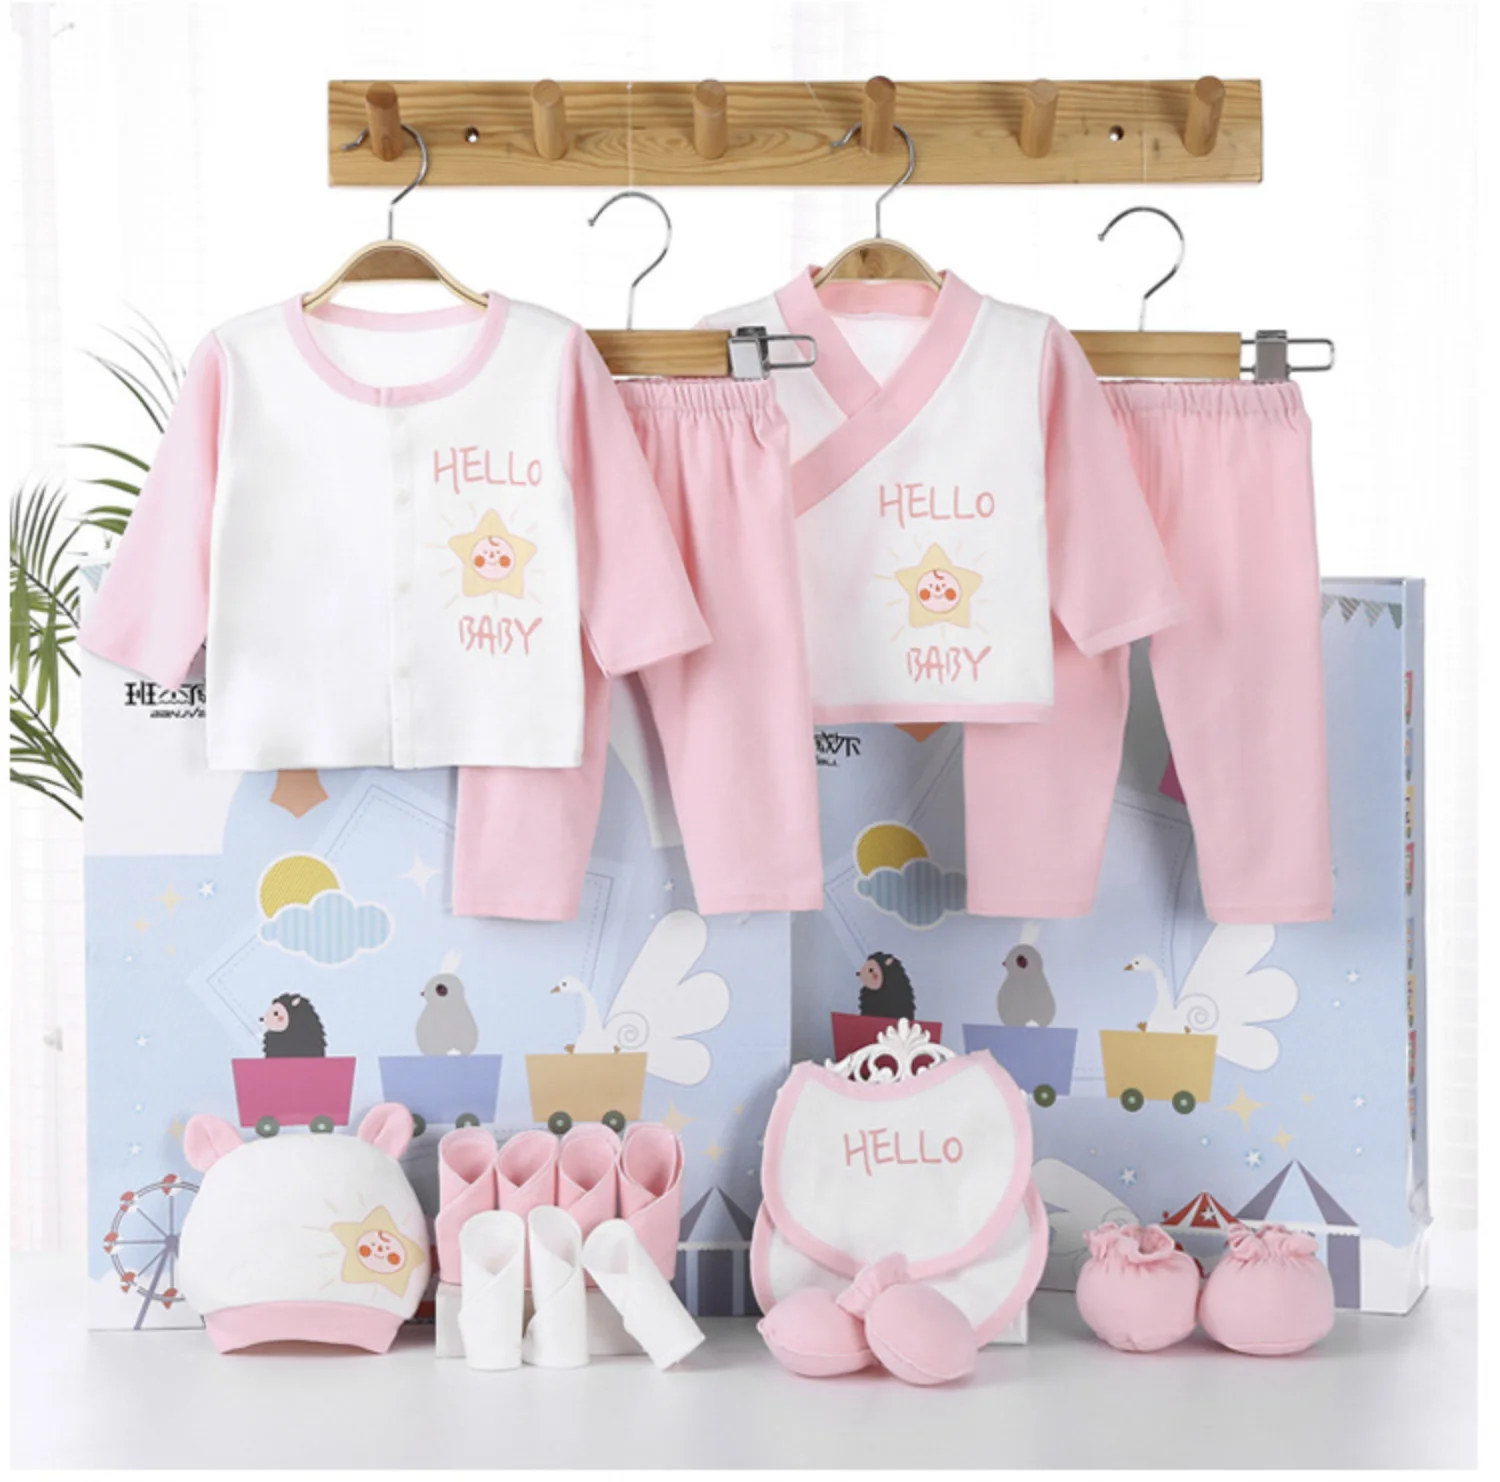 

New 2021 High Quality 100% Cotton 18pcs Baby Clothing Sets Infant Newborn Gift Set Boys Girls Baby Clothes Christmas Gift